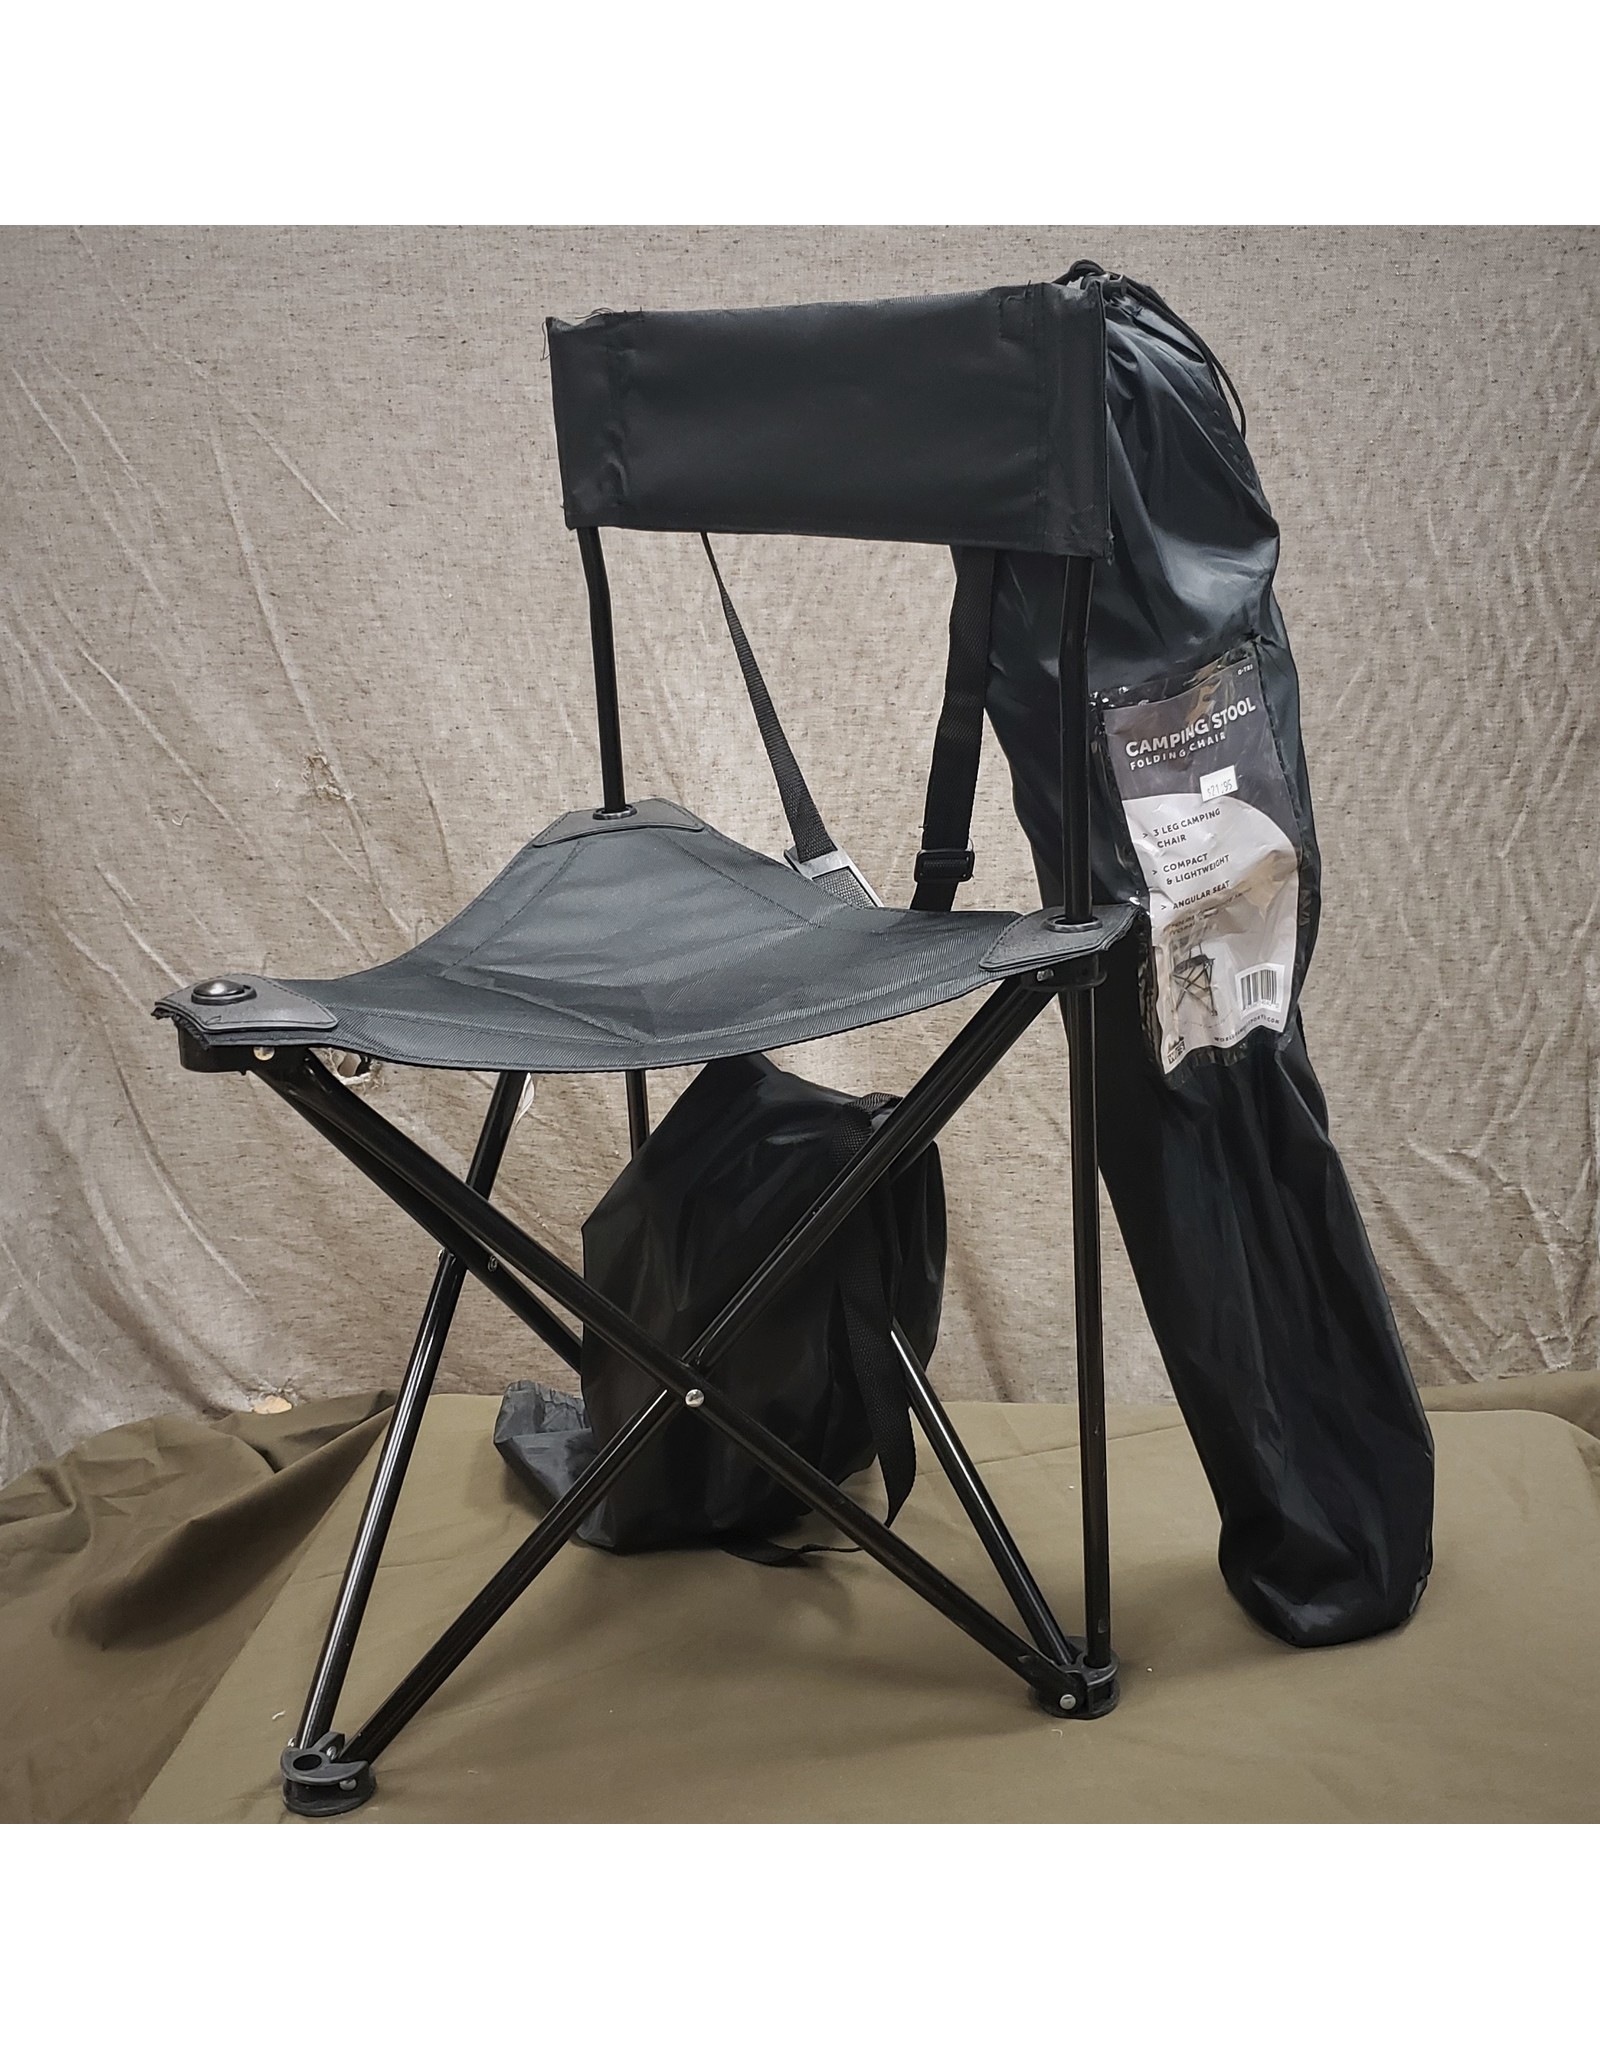 wfs camping stool folding chair